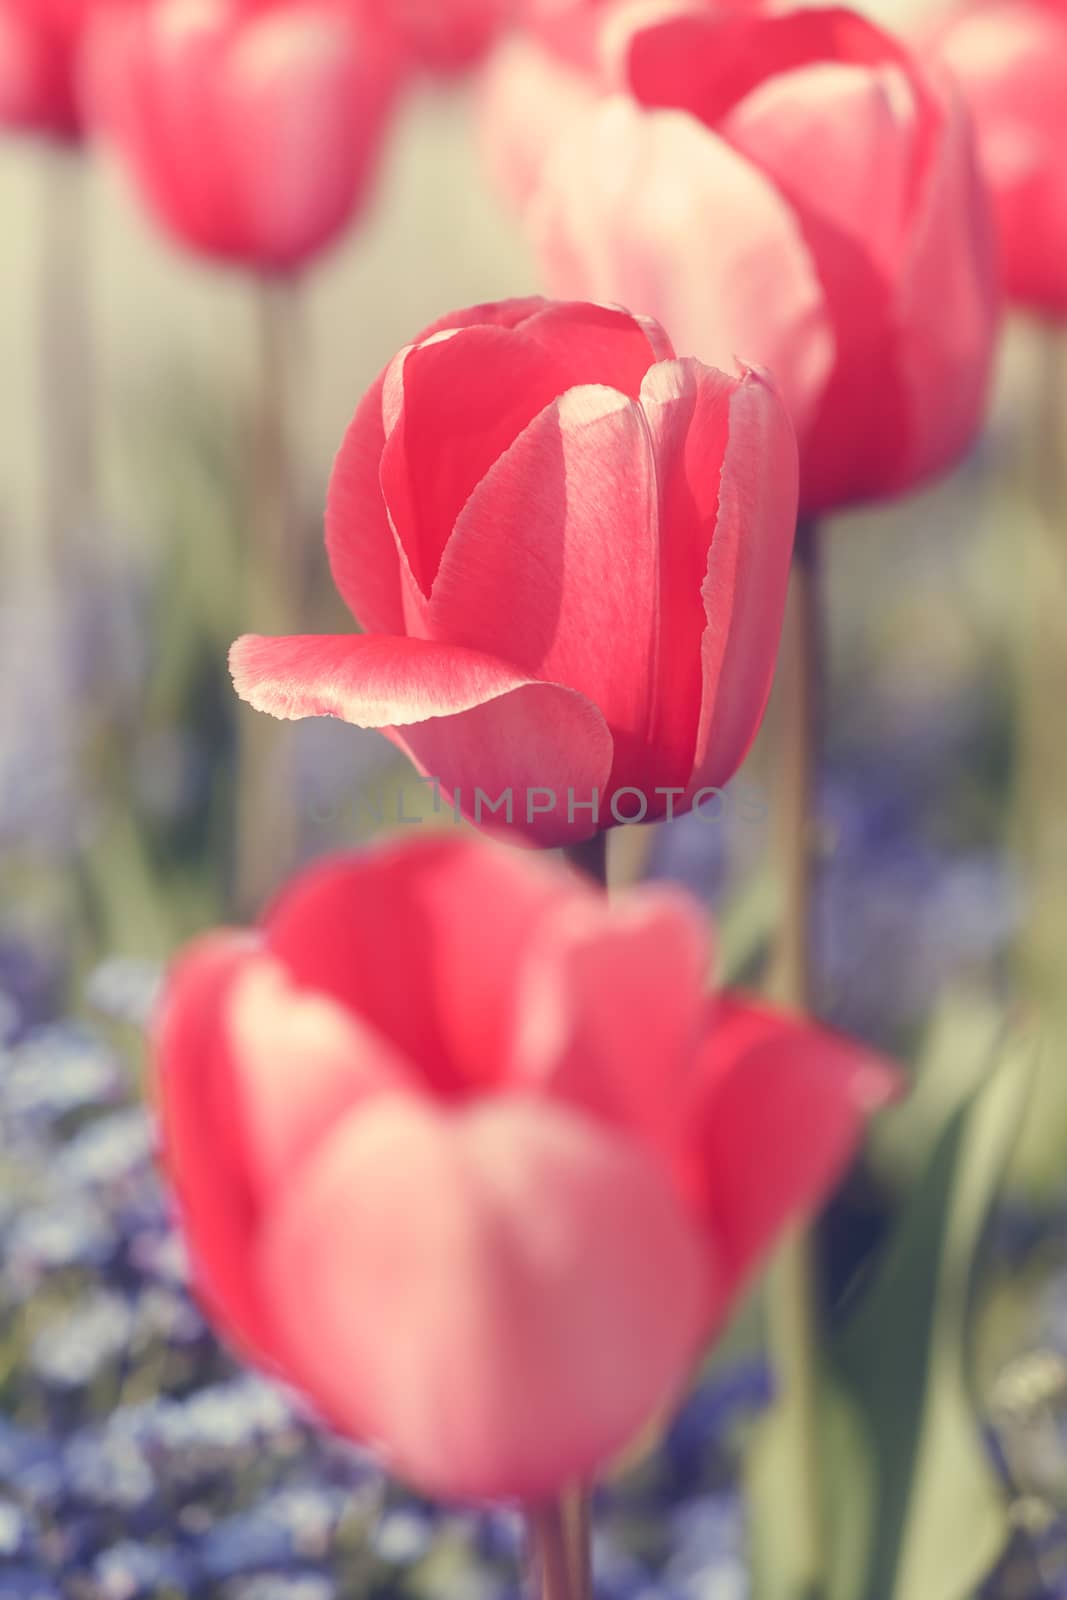 Red tulips and blue flowers in the garden.Soft and blur style for background. Done with vintage retro filter. A photo with very shallow depth of field